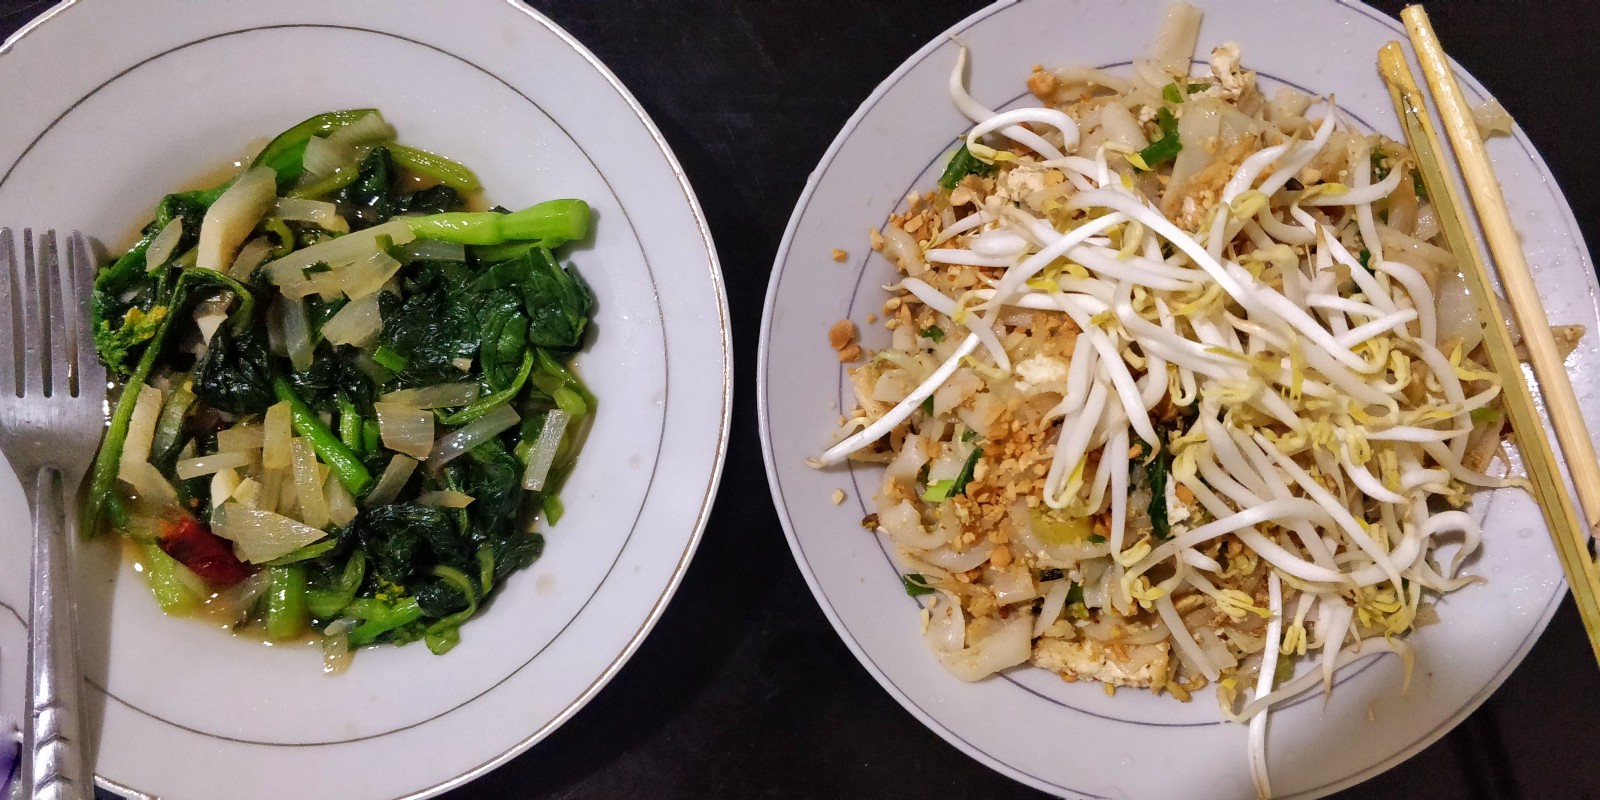 My experiments with the Thai cuisine